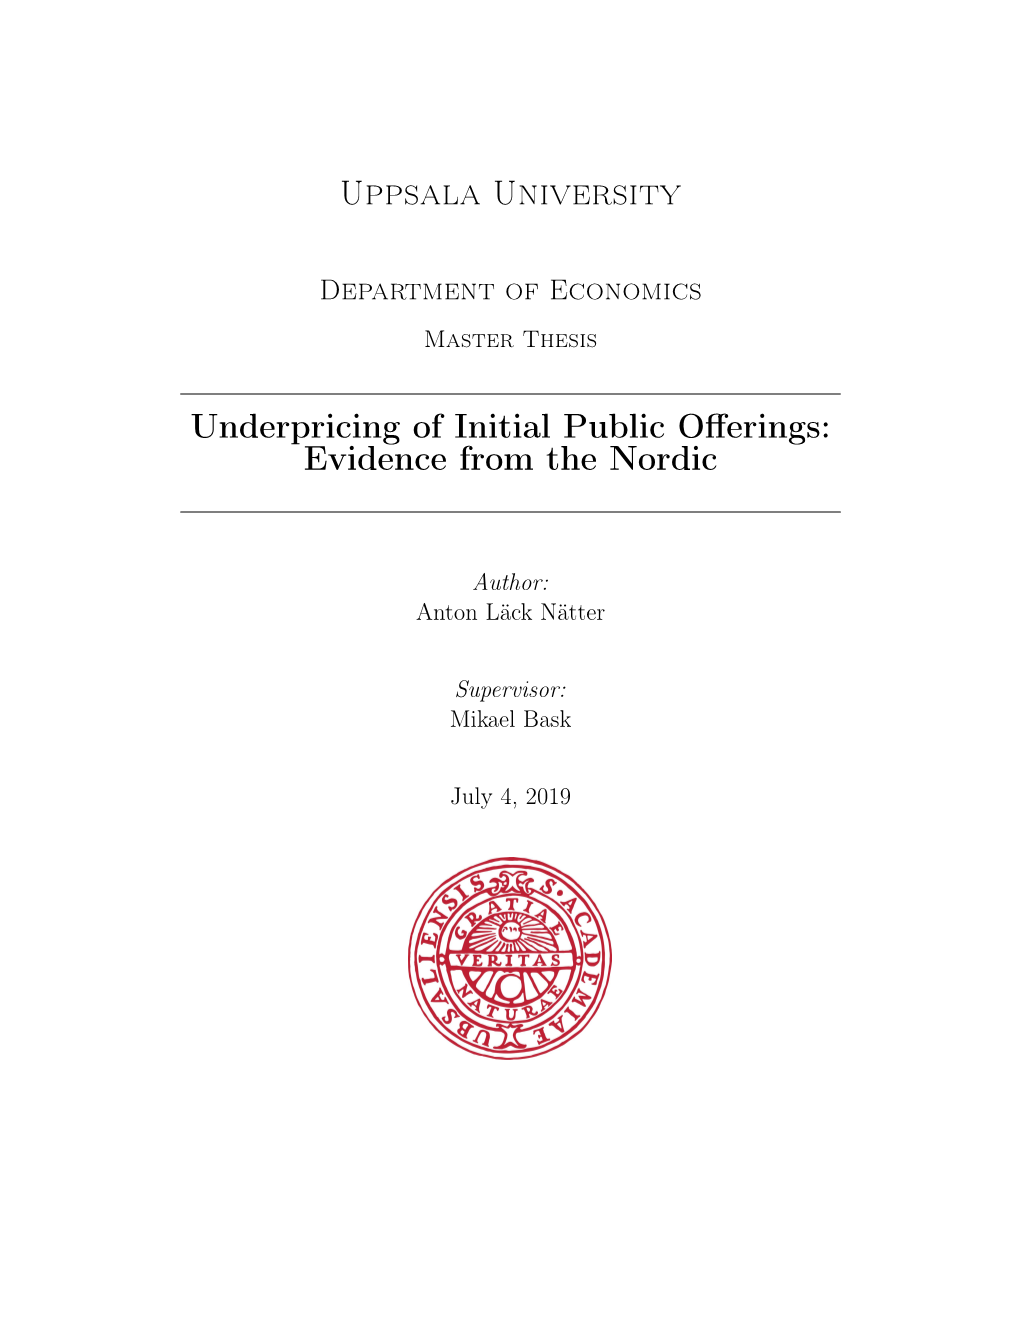 Uppsala University Underpricing of Initial Public Offerings: Evidence from the Nordic